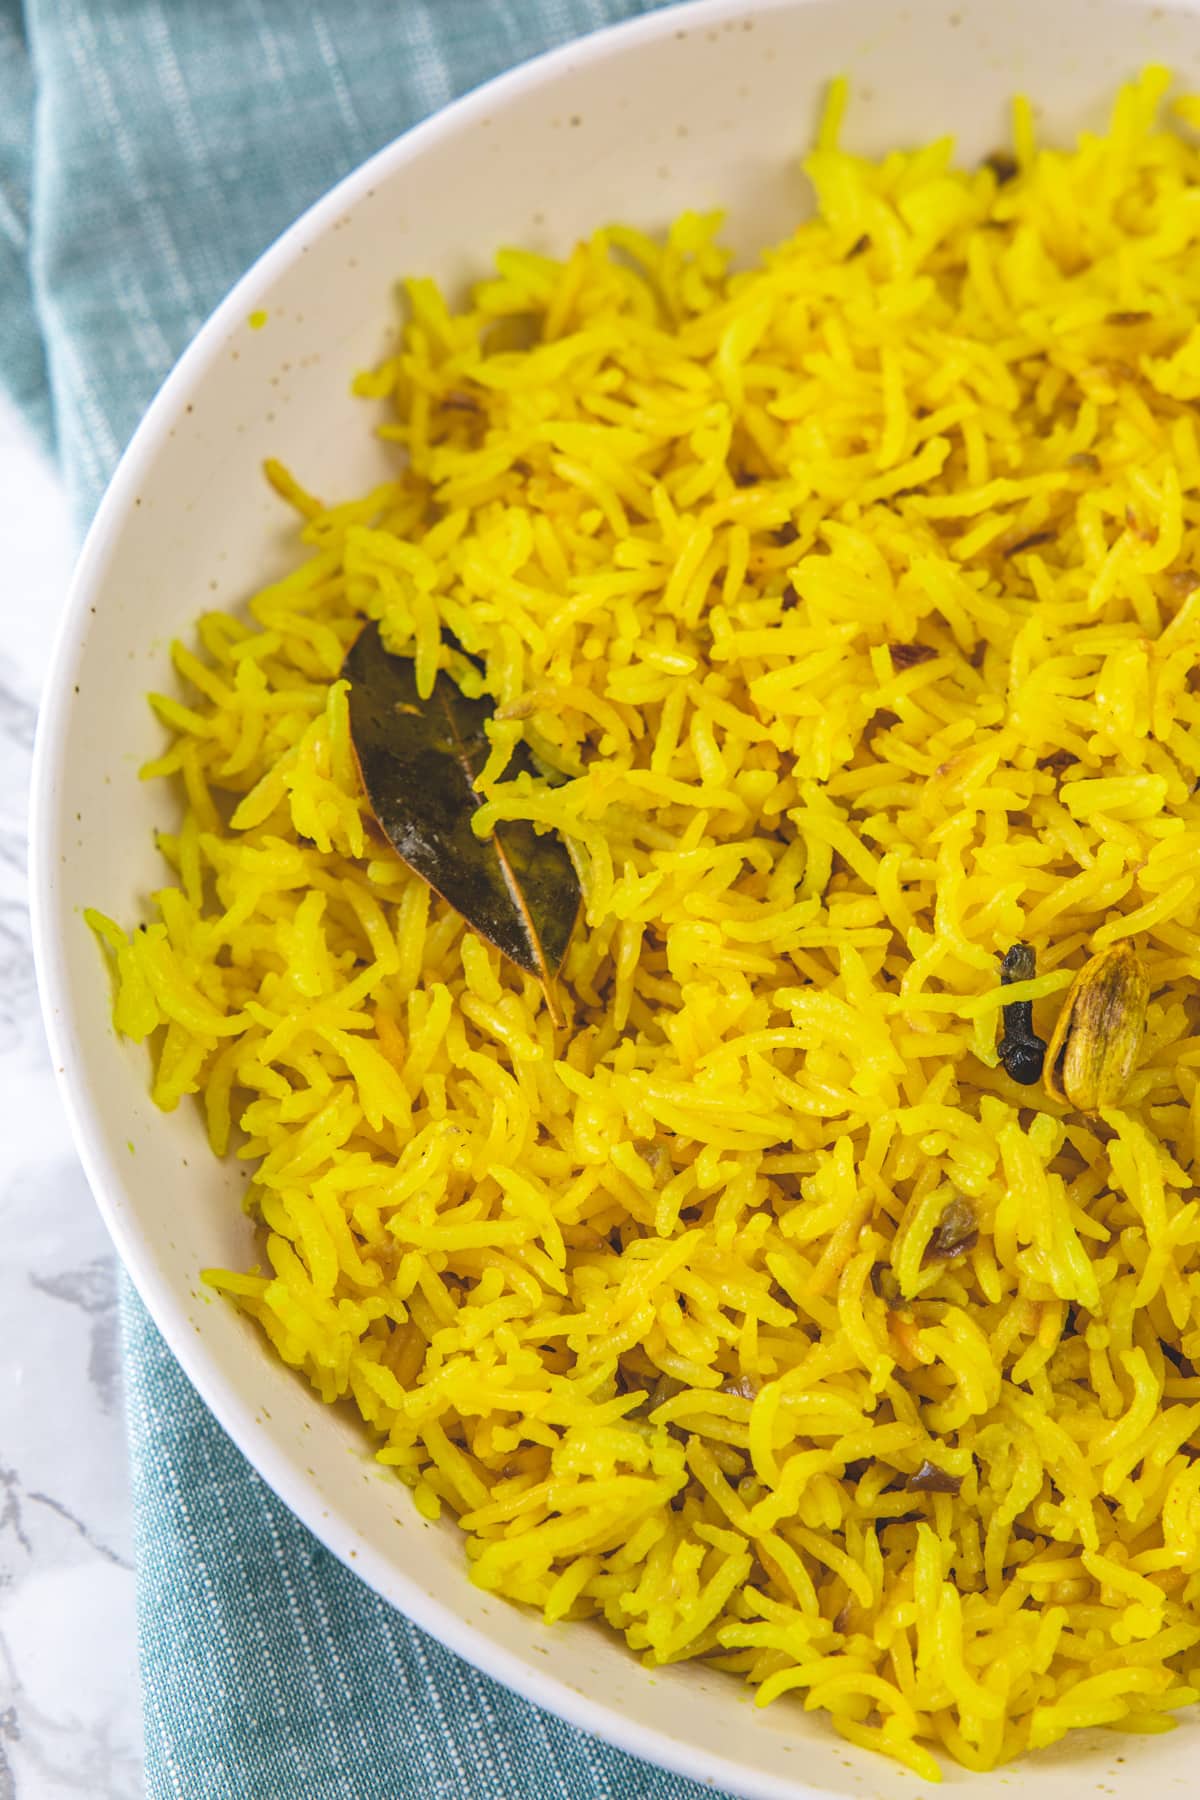 Turmeric rice in a plate with napkin under the plate.